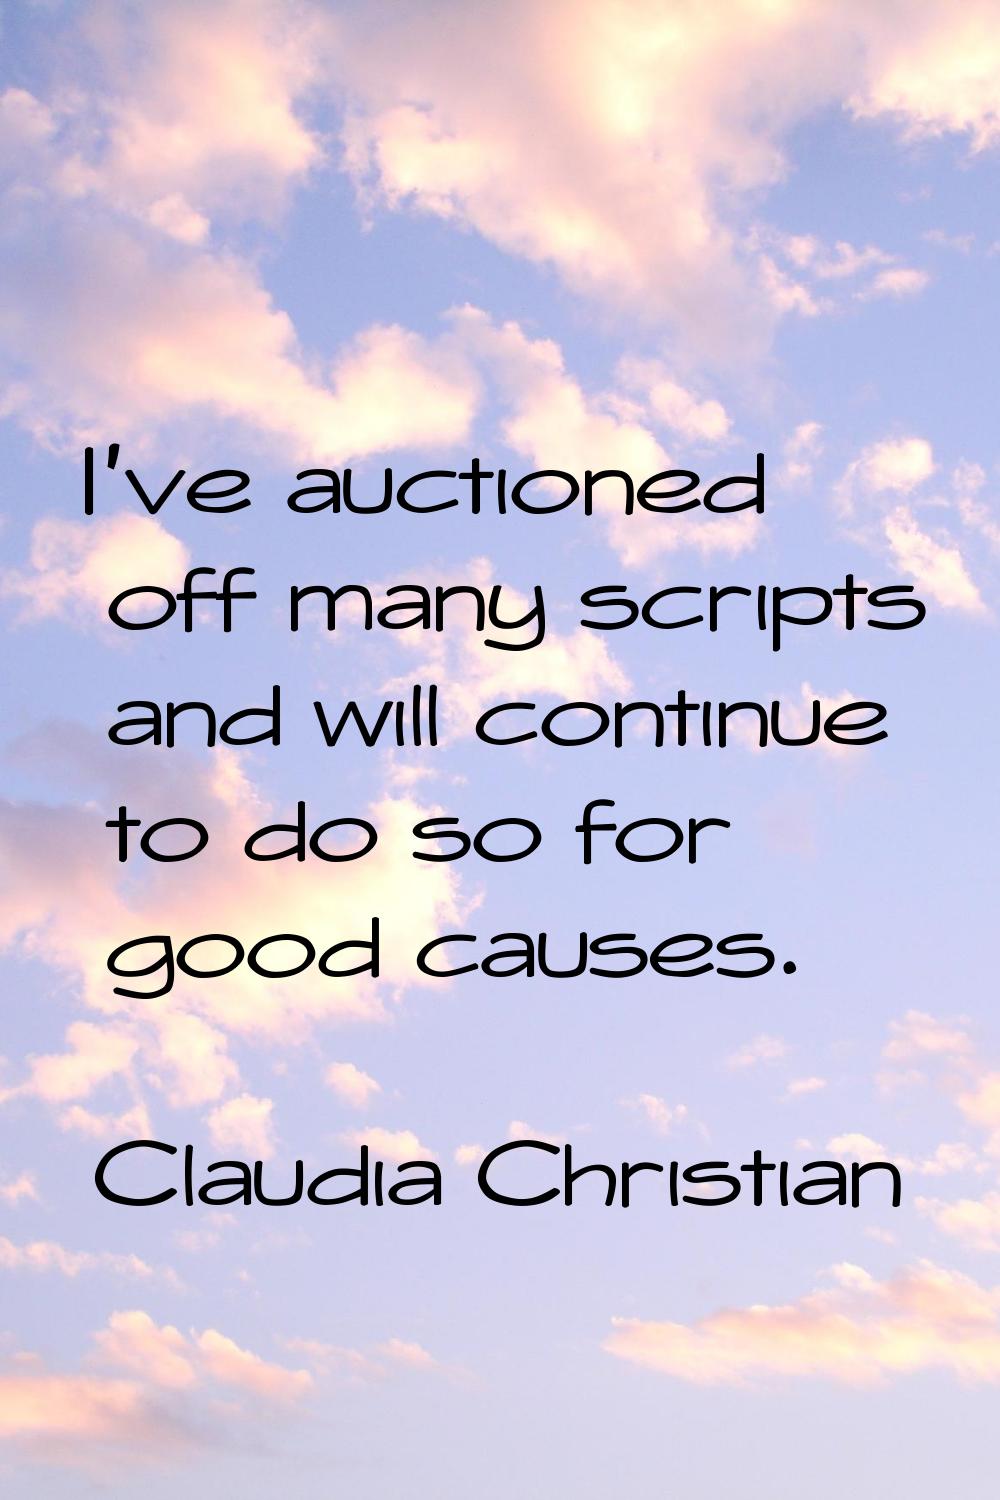 I've auctioned off many scripts and will continue to do so for good causes.